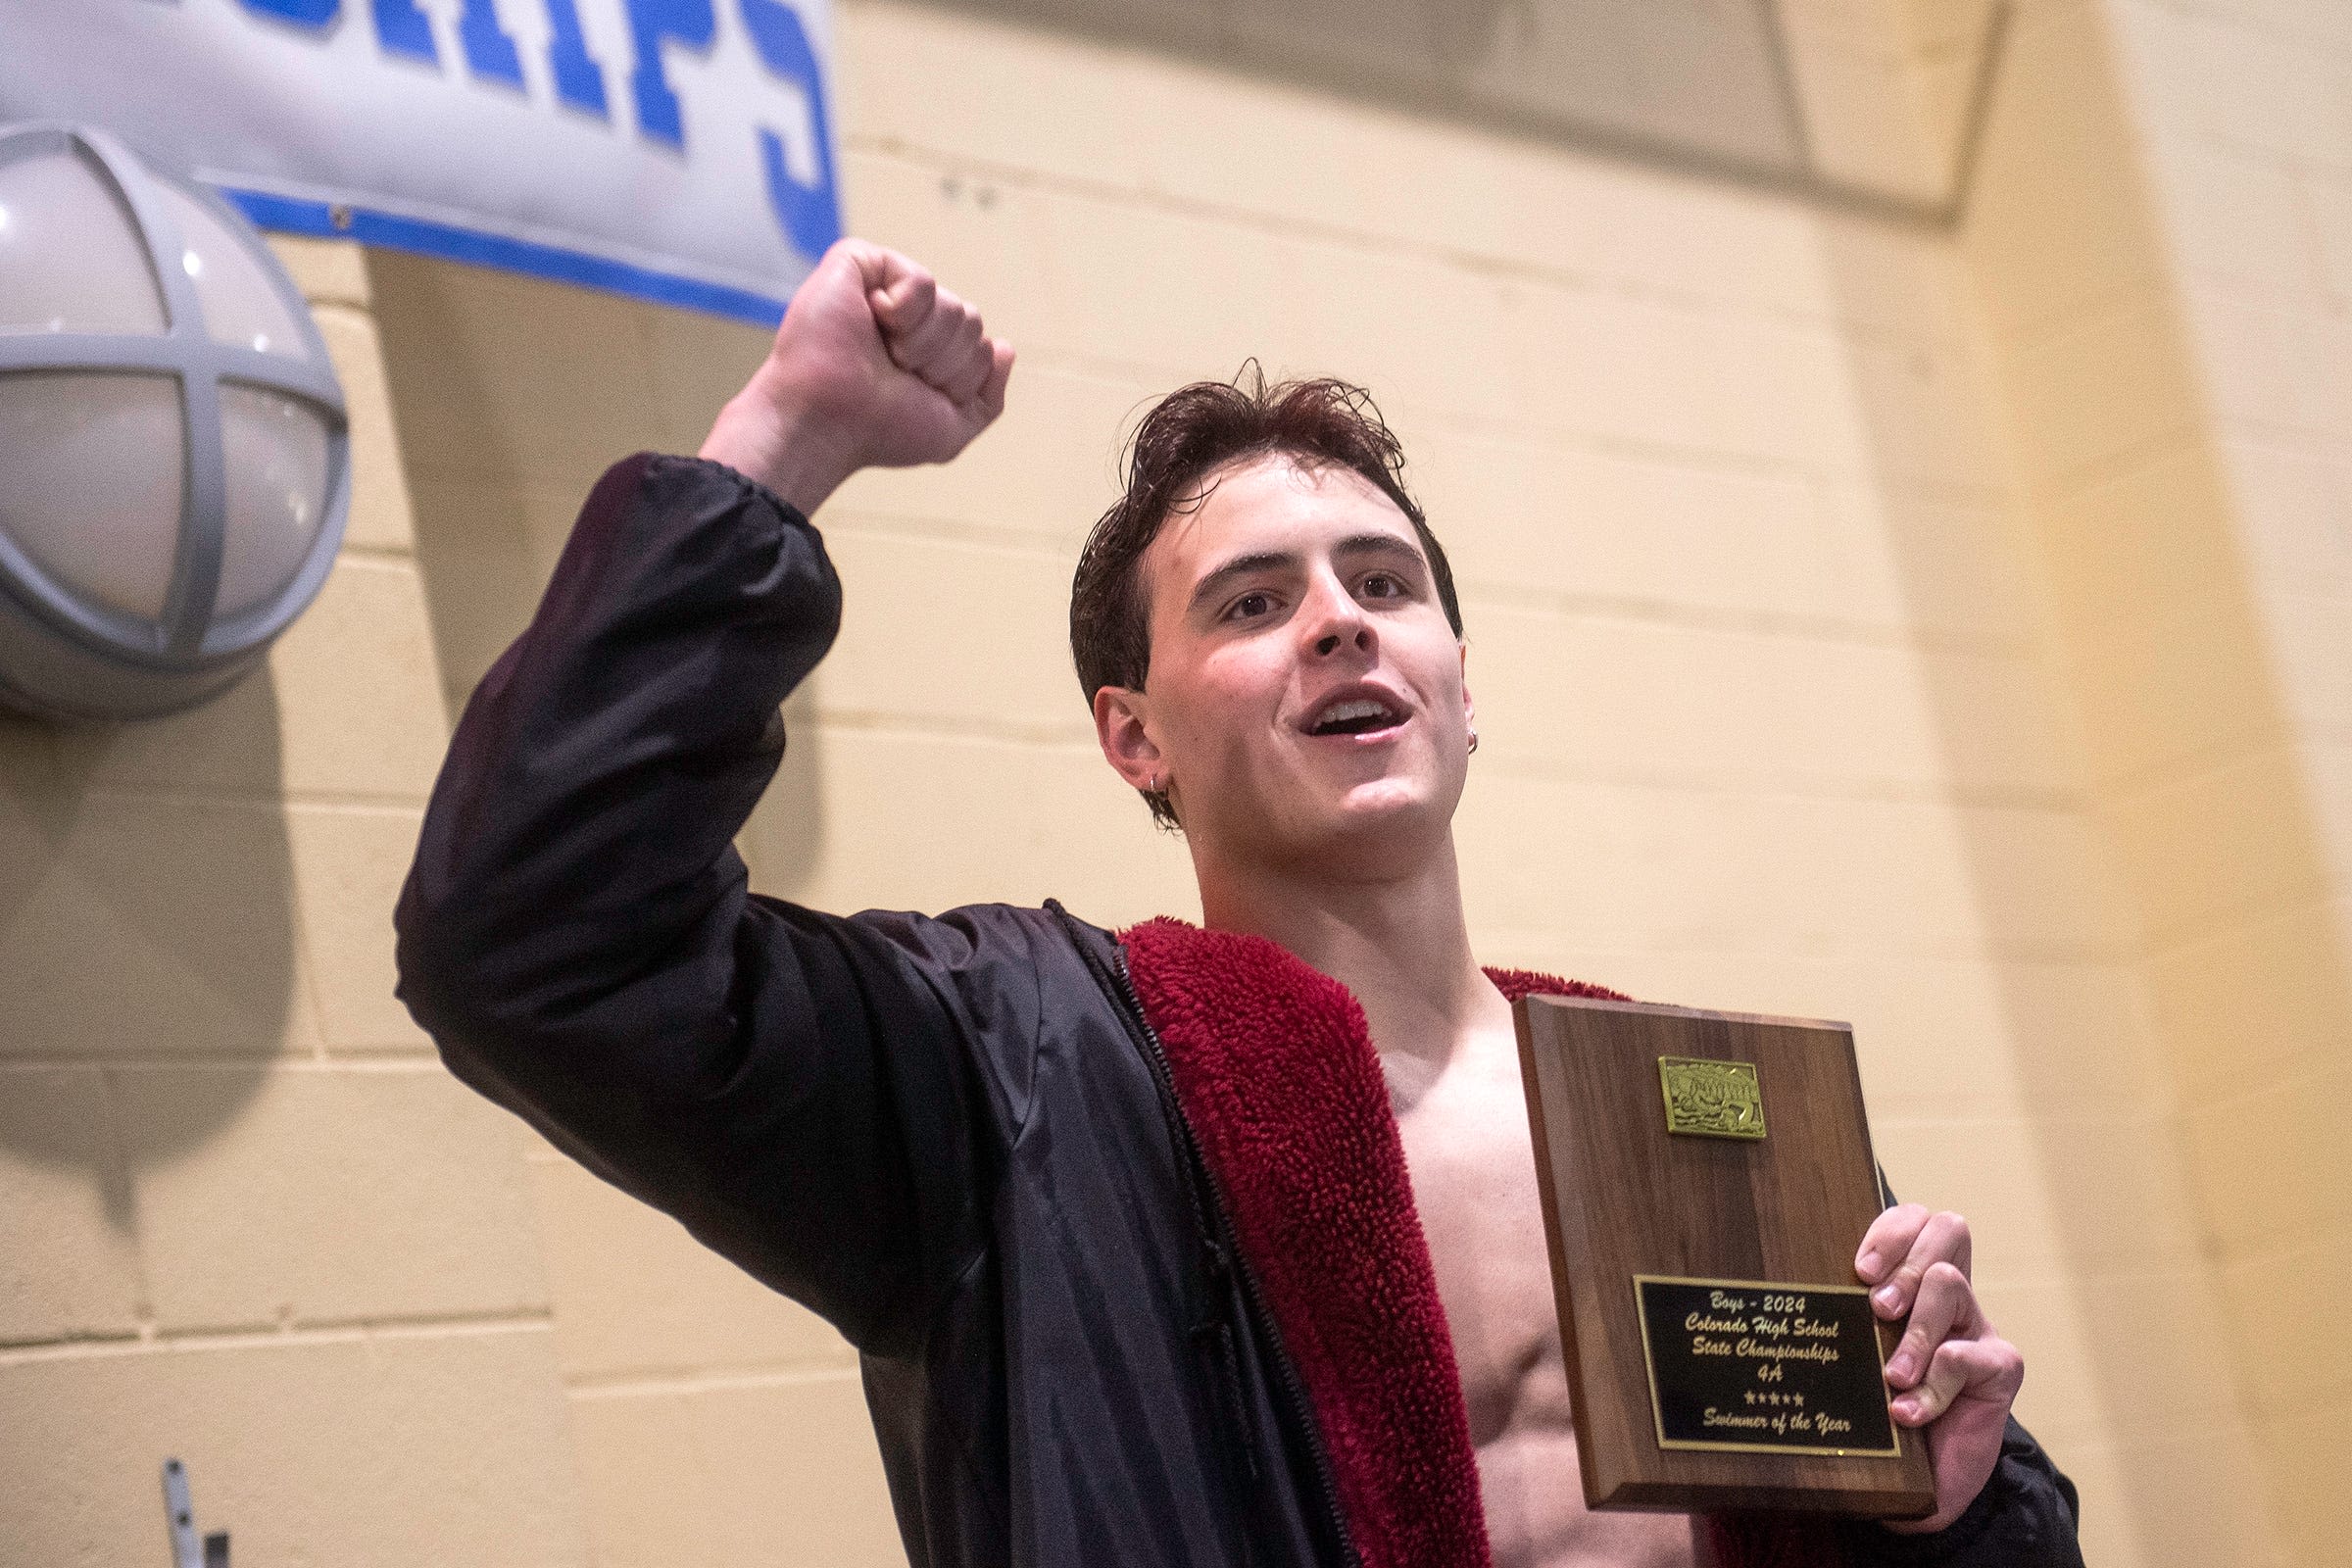 Back from traumatic brain injury, Windsor's Jake Eccleston again wins two 4A swimming titles